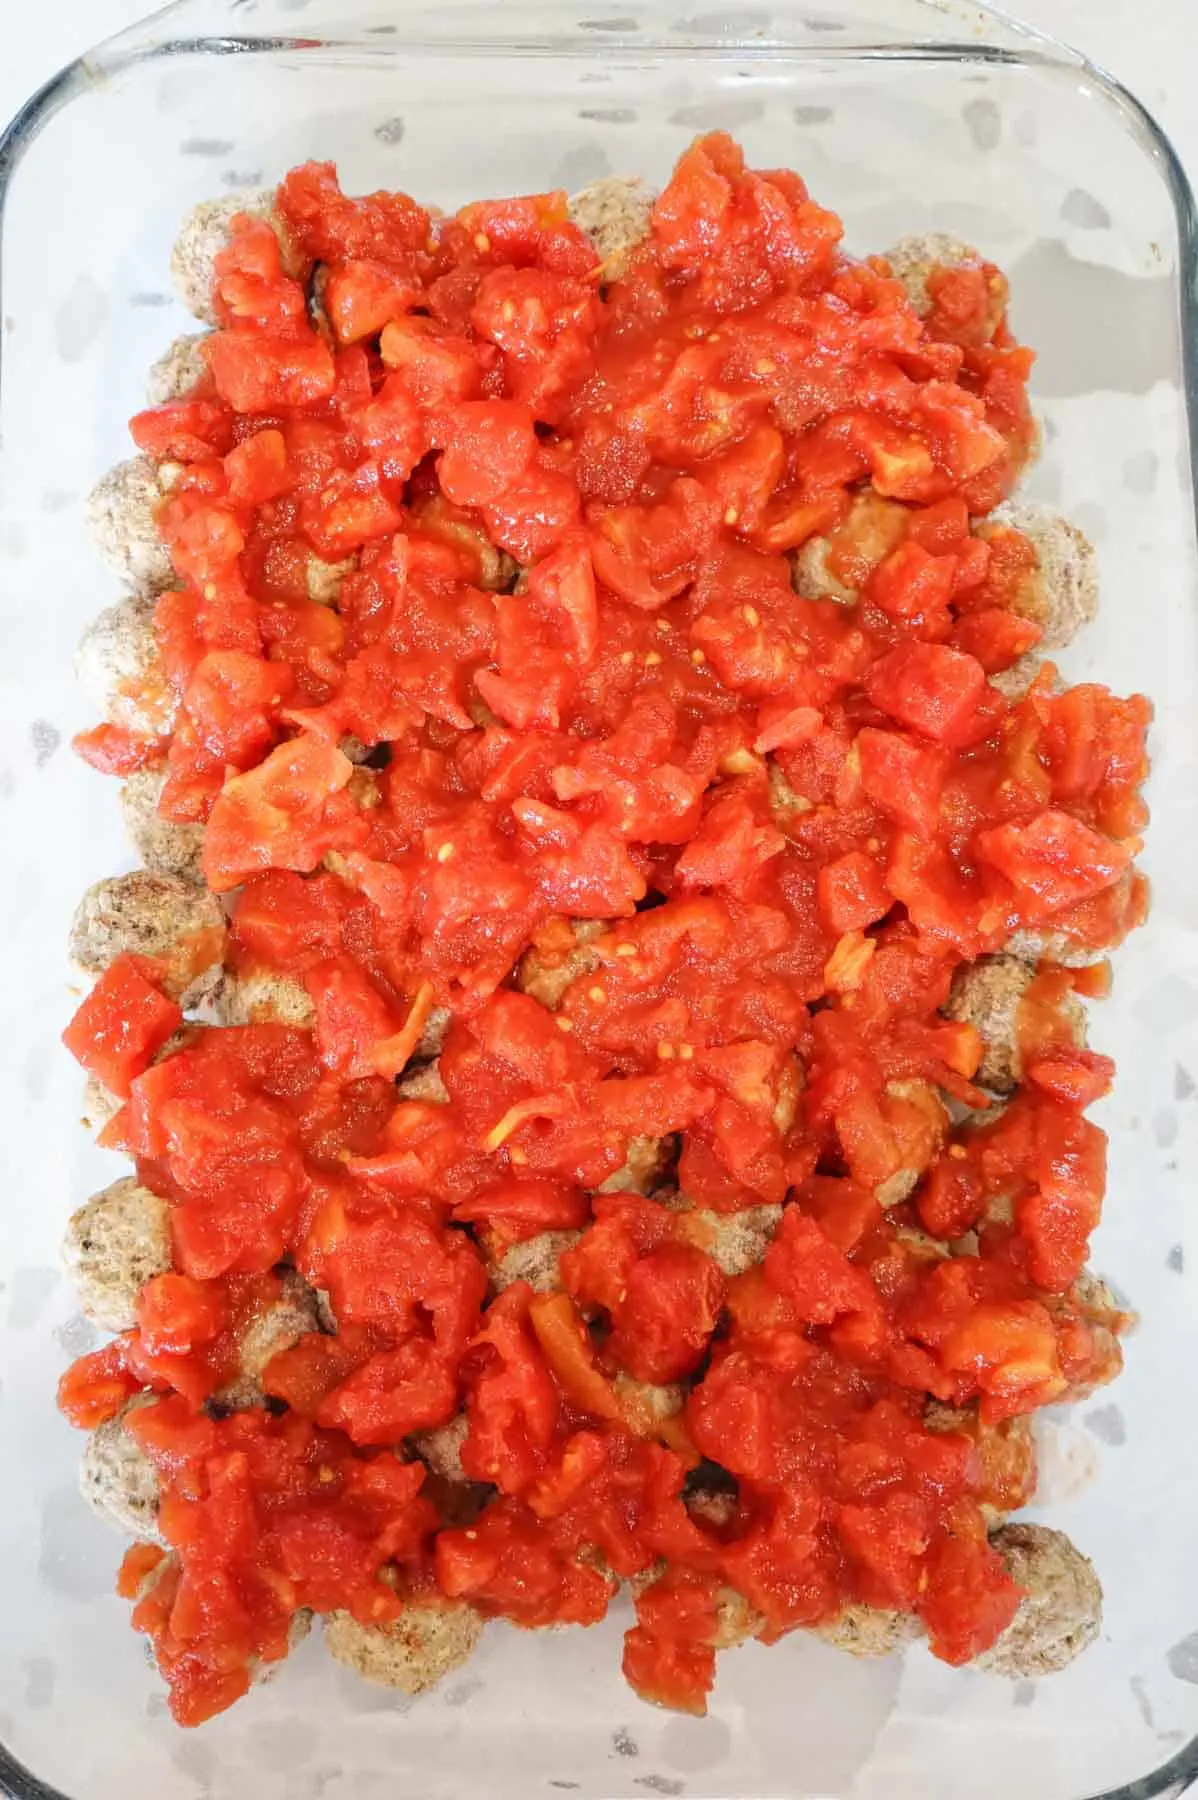 diced tomatoes on top of meatballs in a baking dish